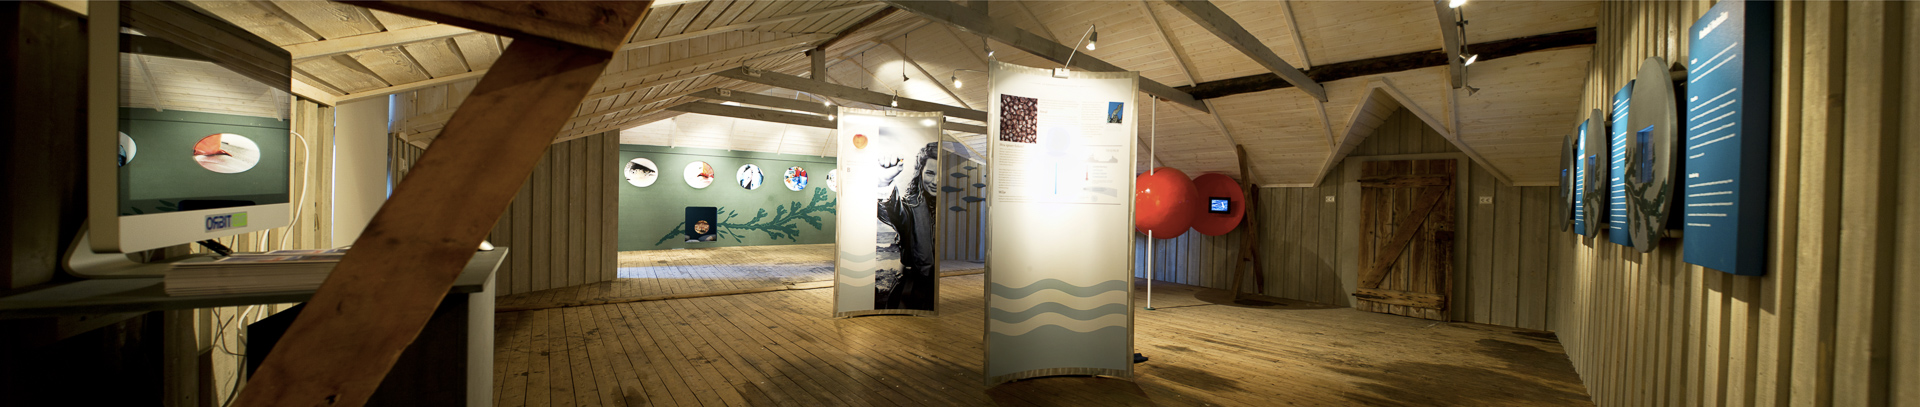 There is a large exhibit room with diagrams, maps and information on fish farming and more in Northern Norway © Alvin Jensvold/Akvakultur i Vesterålen